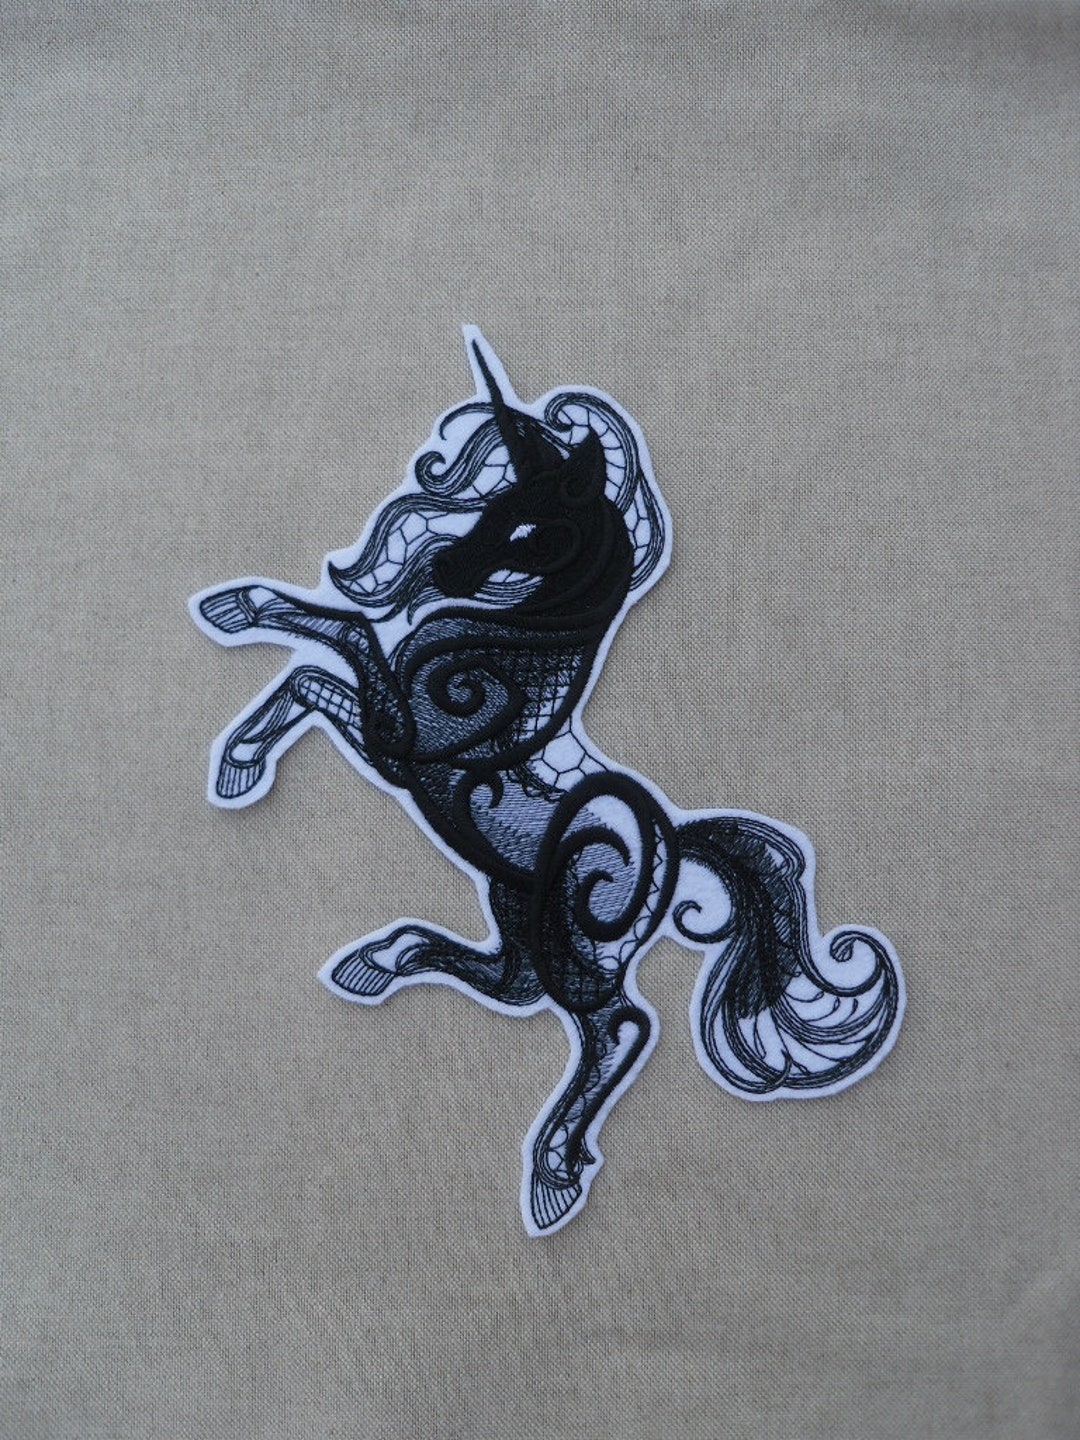 Unicorn Logo Custom Embroidered Patches With Iron On Backing For Clothing